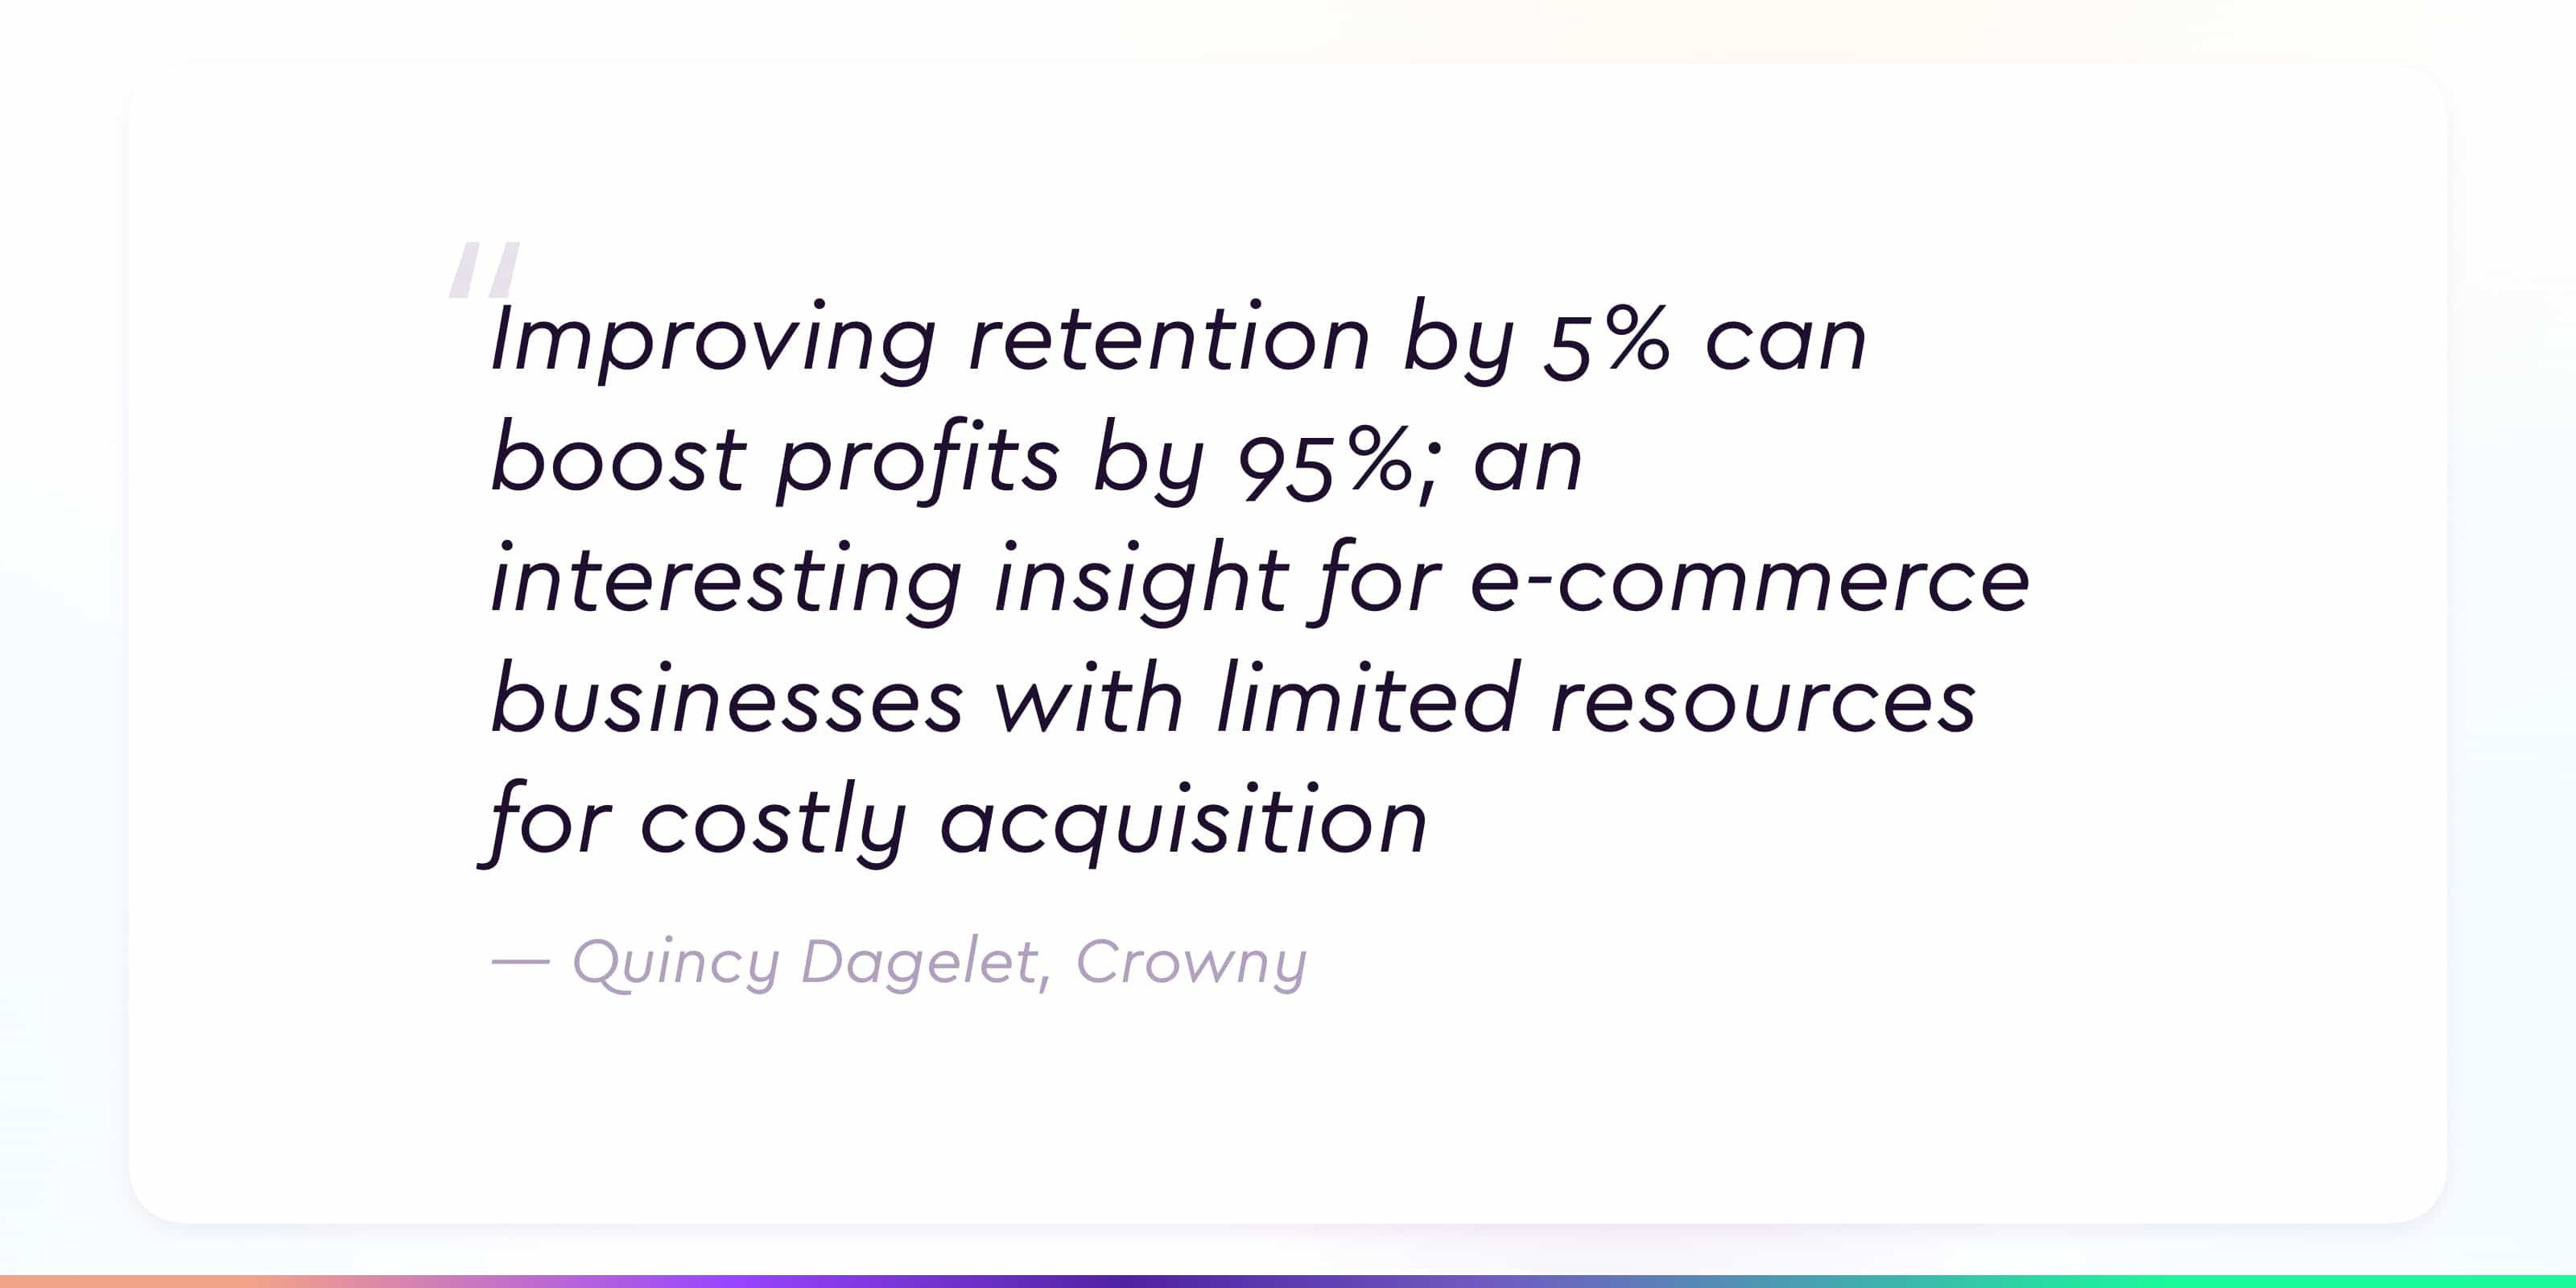 Quote by Quincy Dagelet on retention acquisition and small e-commerce business